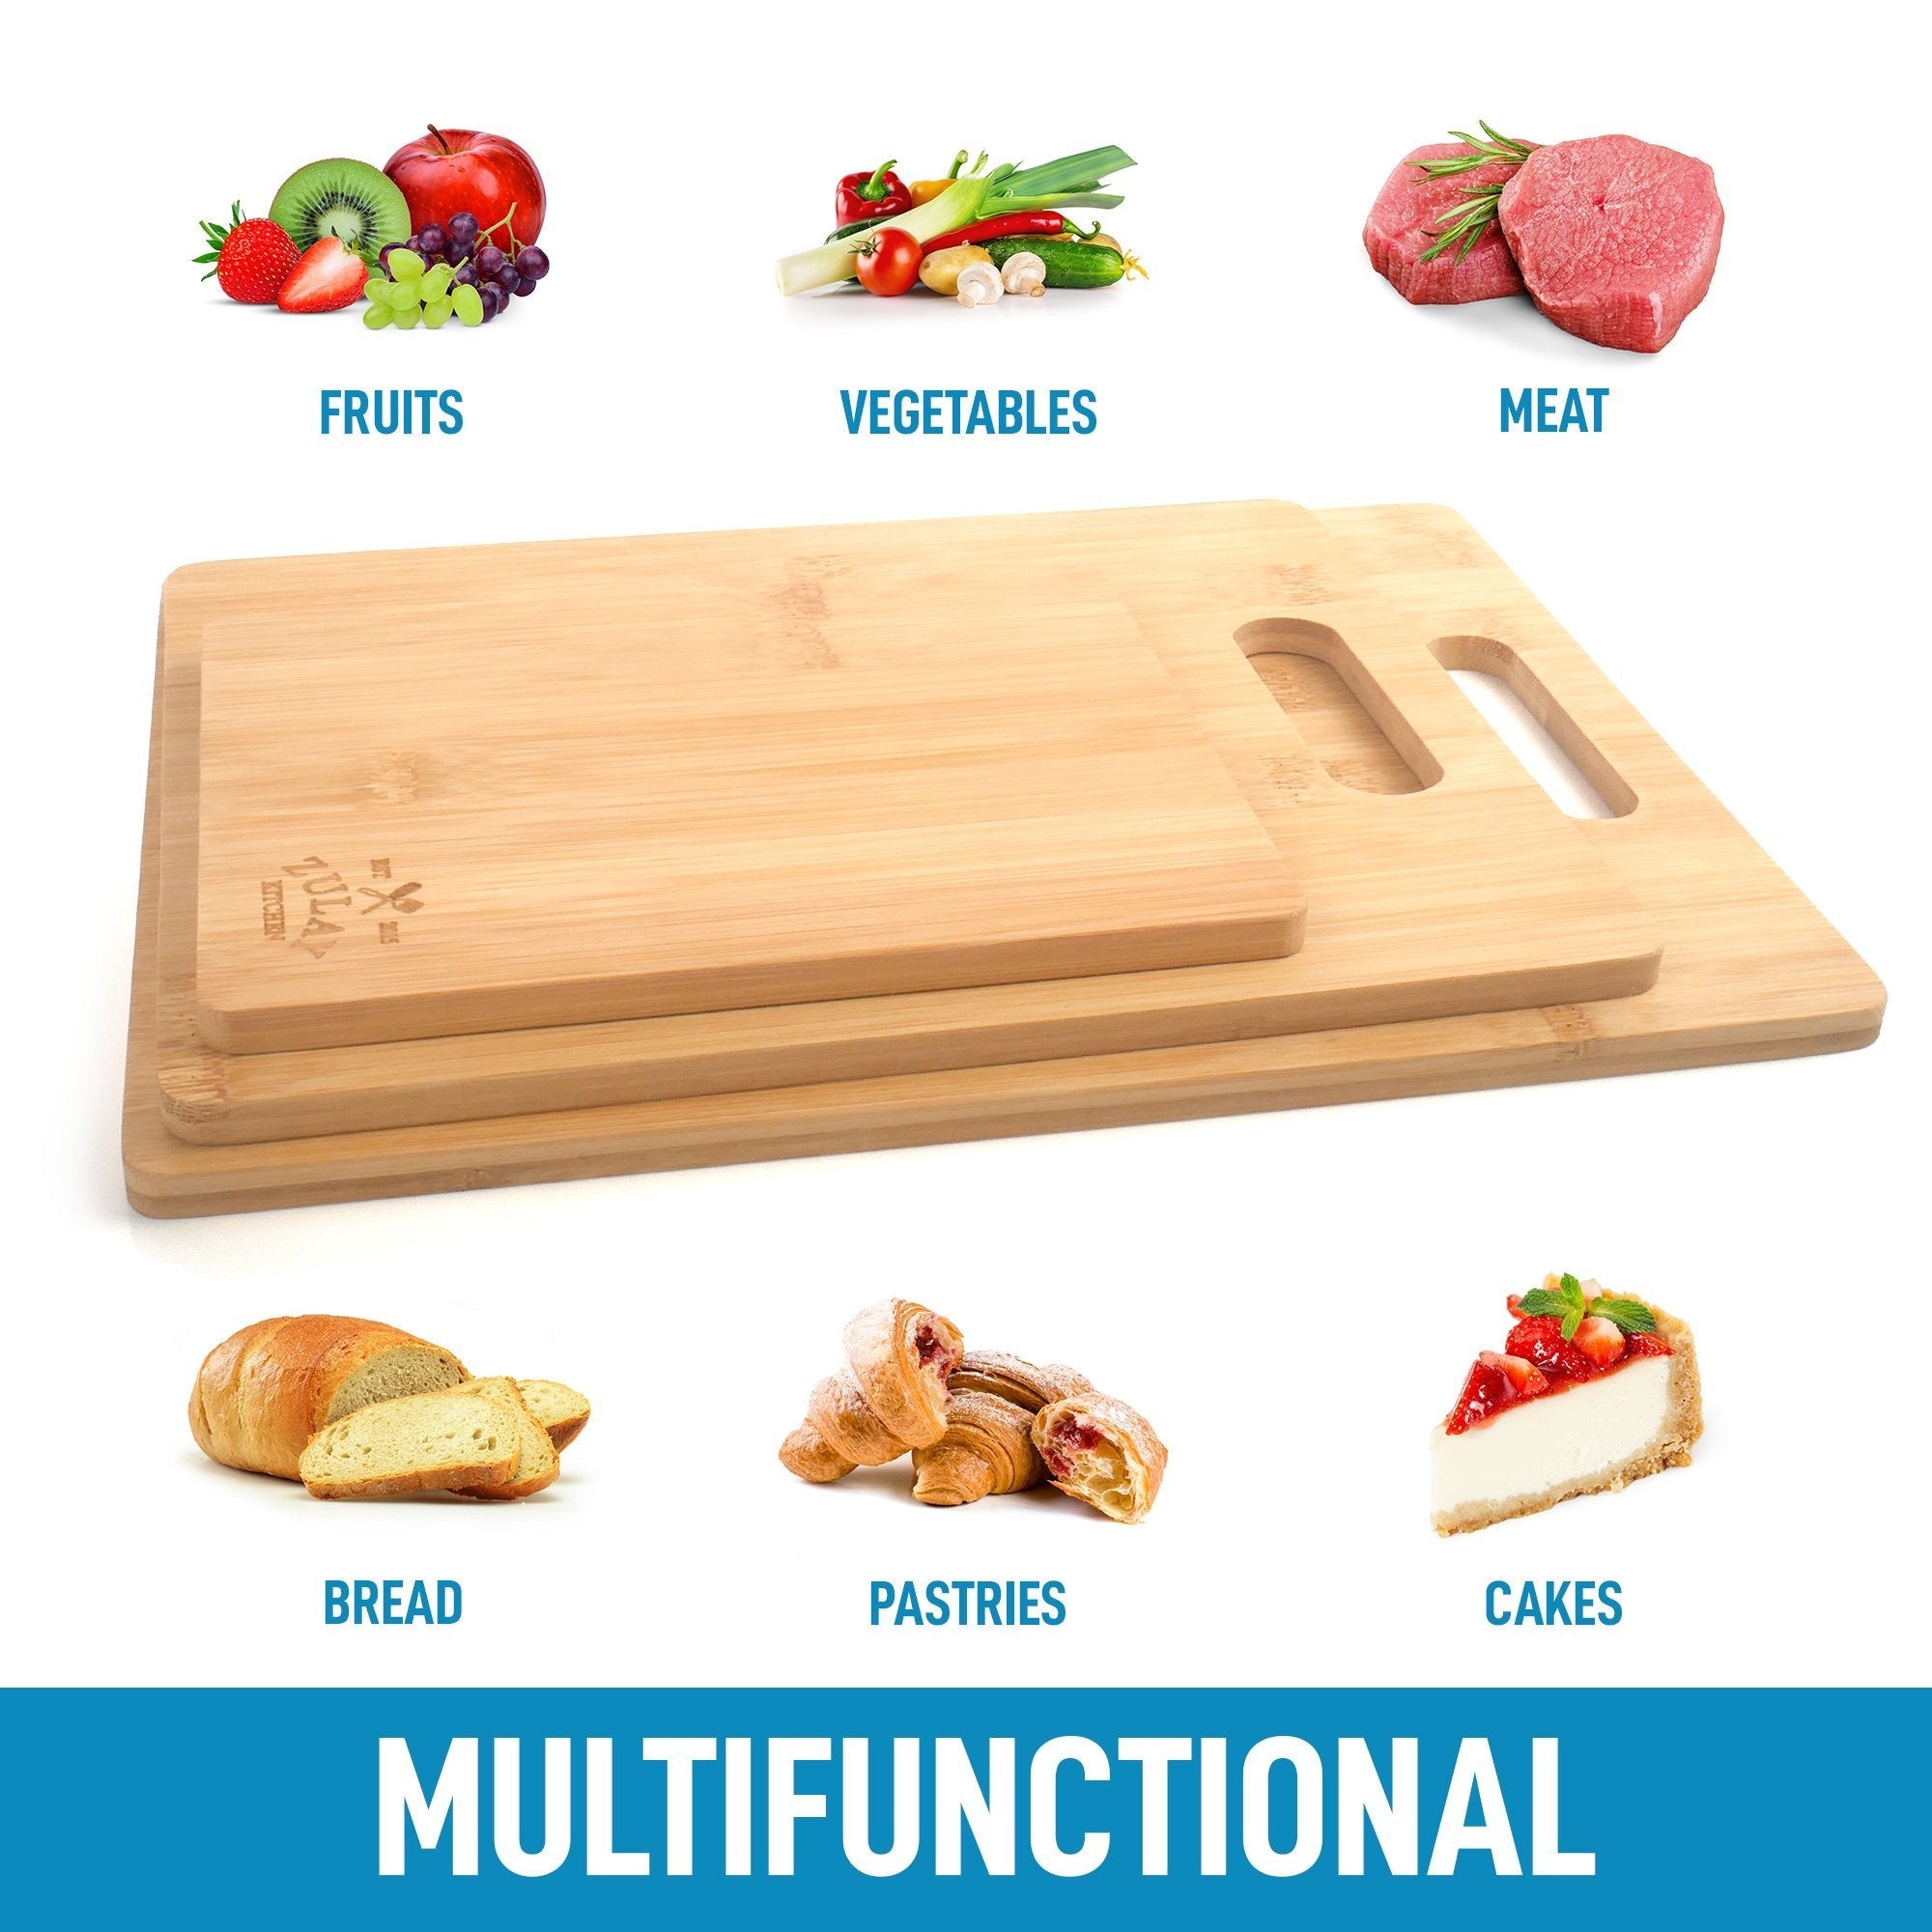 Classic Bamboo Cutting & Serving Board - Small